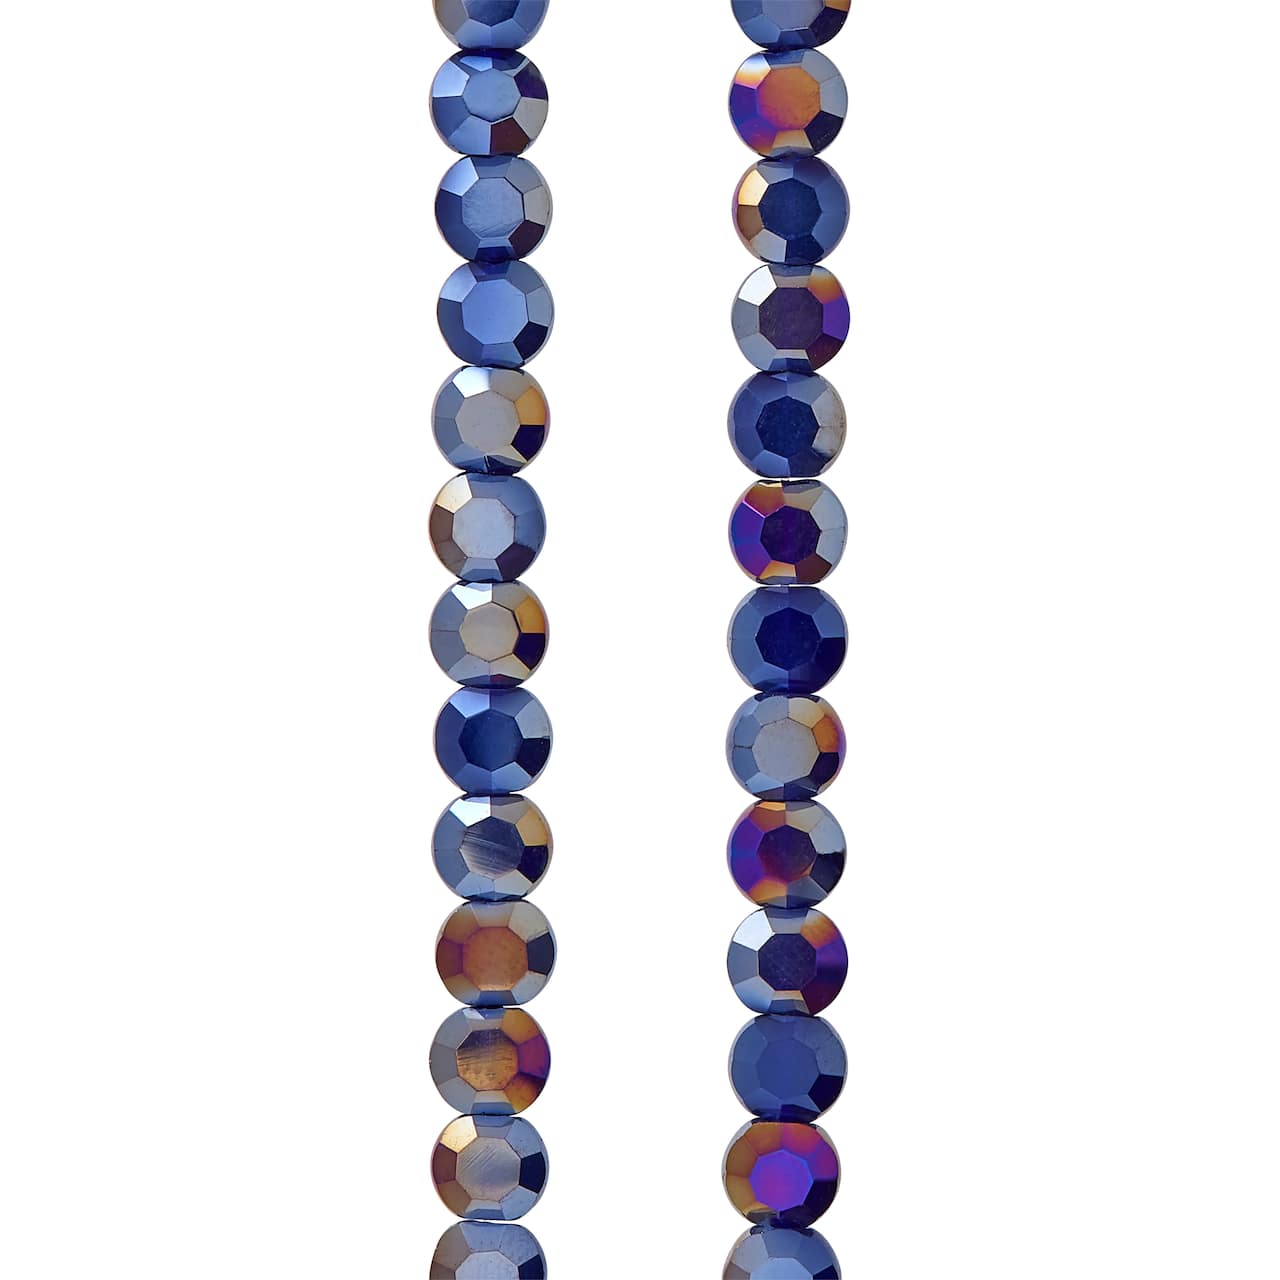 12 Pack: Dark Blue Silverite Opaque Flat Round Glass Beads, 6mm by